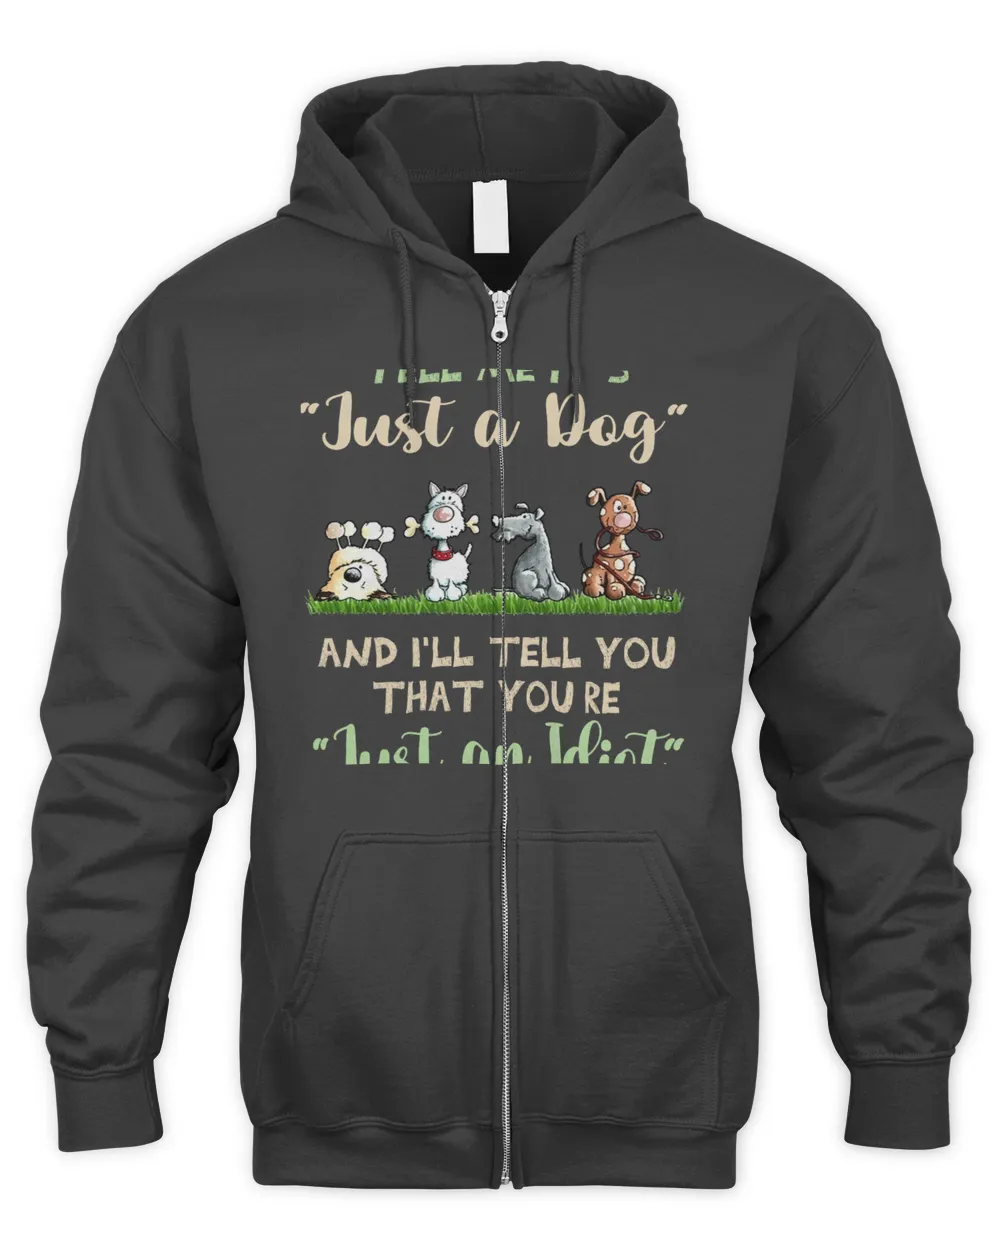 Tell Me It's Just A Dog And I'll Tell You That You're Just An Idiot Sale